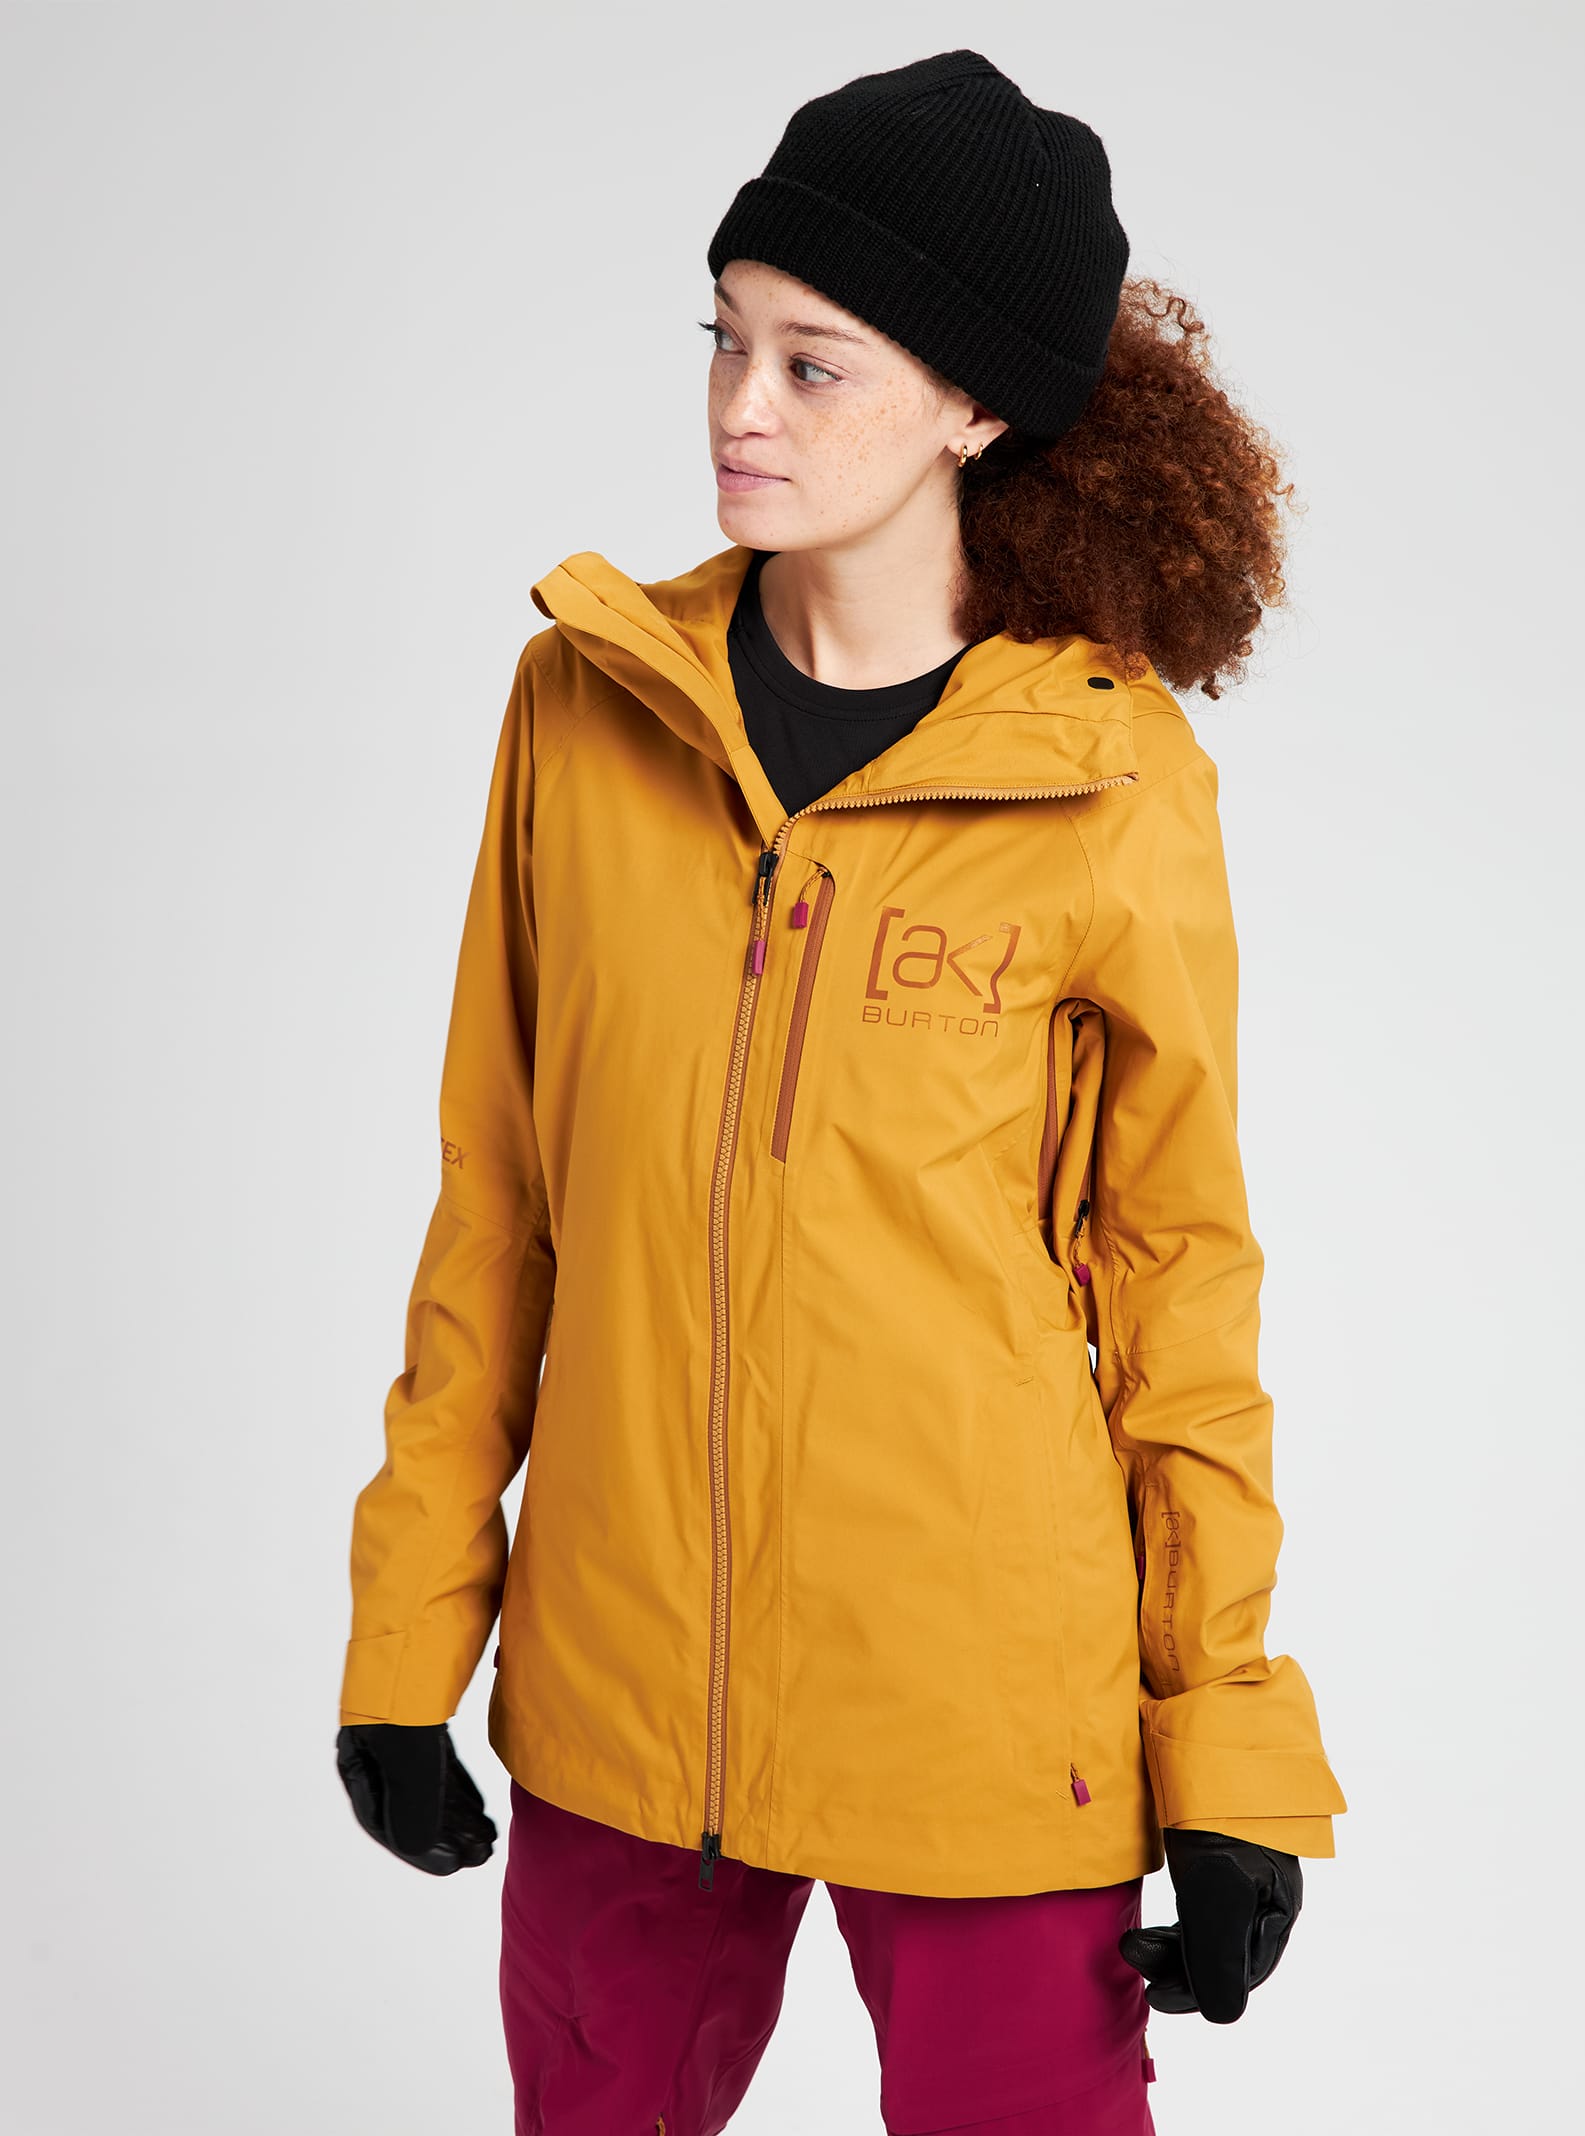 Outlet for Snowboard Gear & Clothing | Burton Snowboards PT